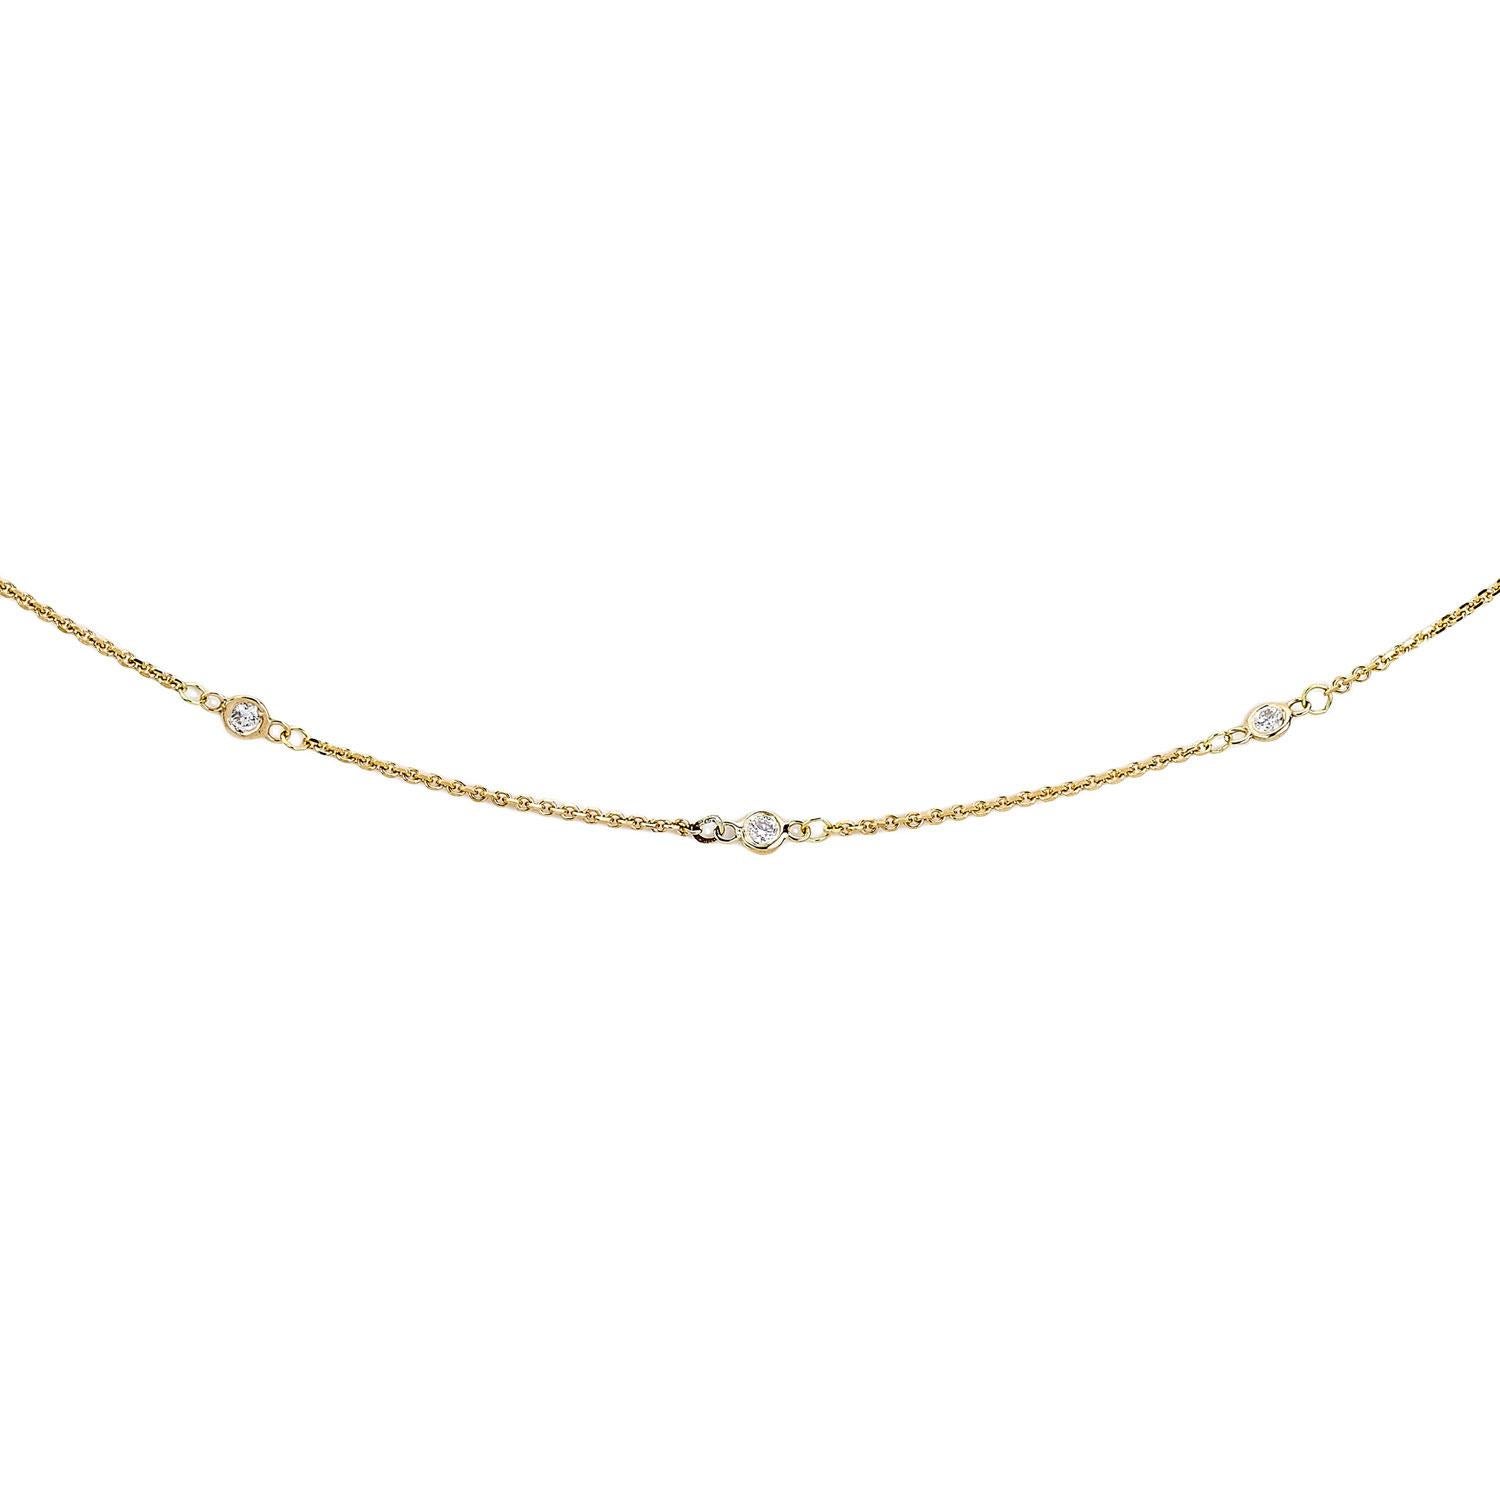 Adorn yourself or your favorite person with the lovely elegance of this 14-karat gold and diamond necklace, which boasts 12 evenly spaced diamonds. Choose from multiple gold colors to complement the diamonds. The high-polish finish on the gold